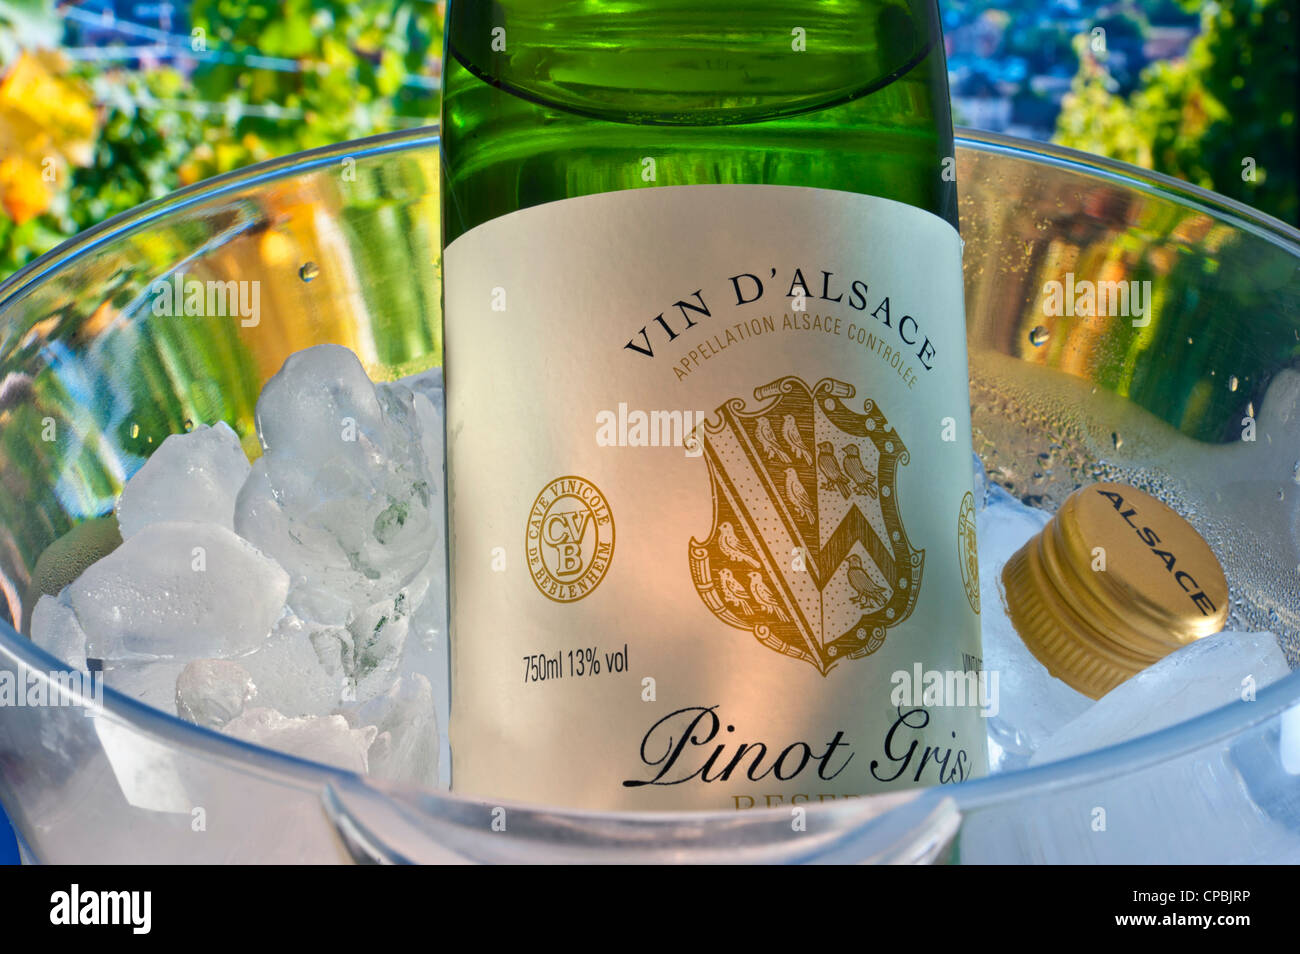 Alsace Pinot Gris wine label on bottle in iced cooler with screw cap, vineyards in background Alsace France Stock Photo